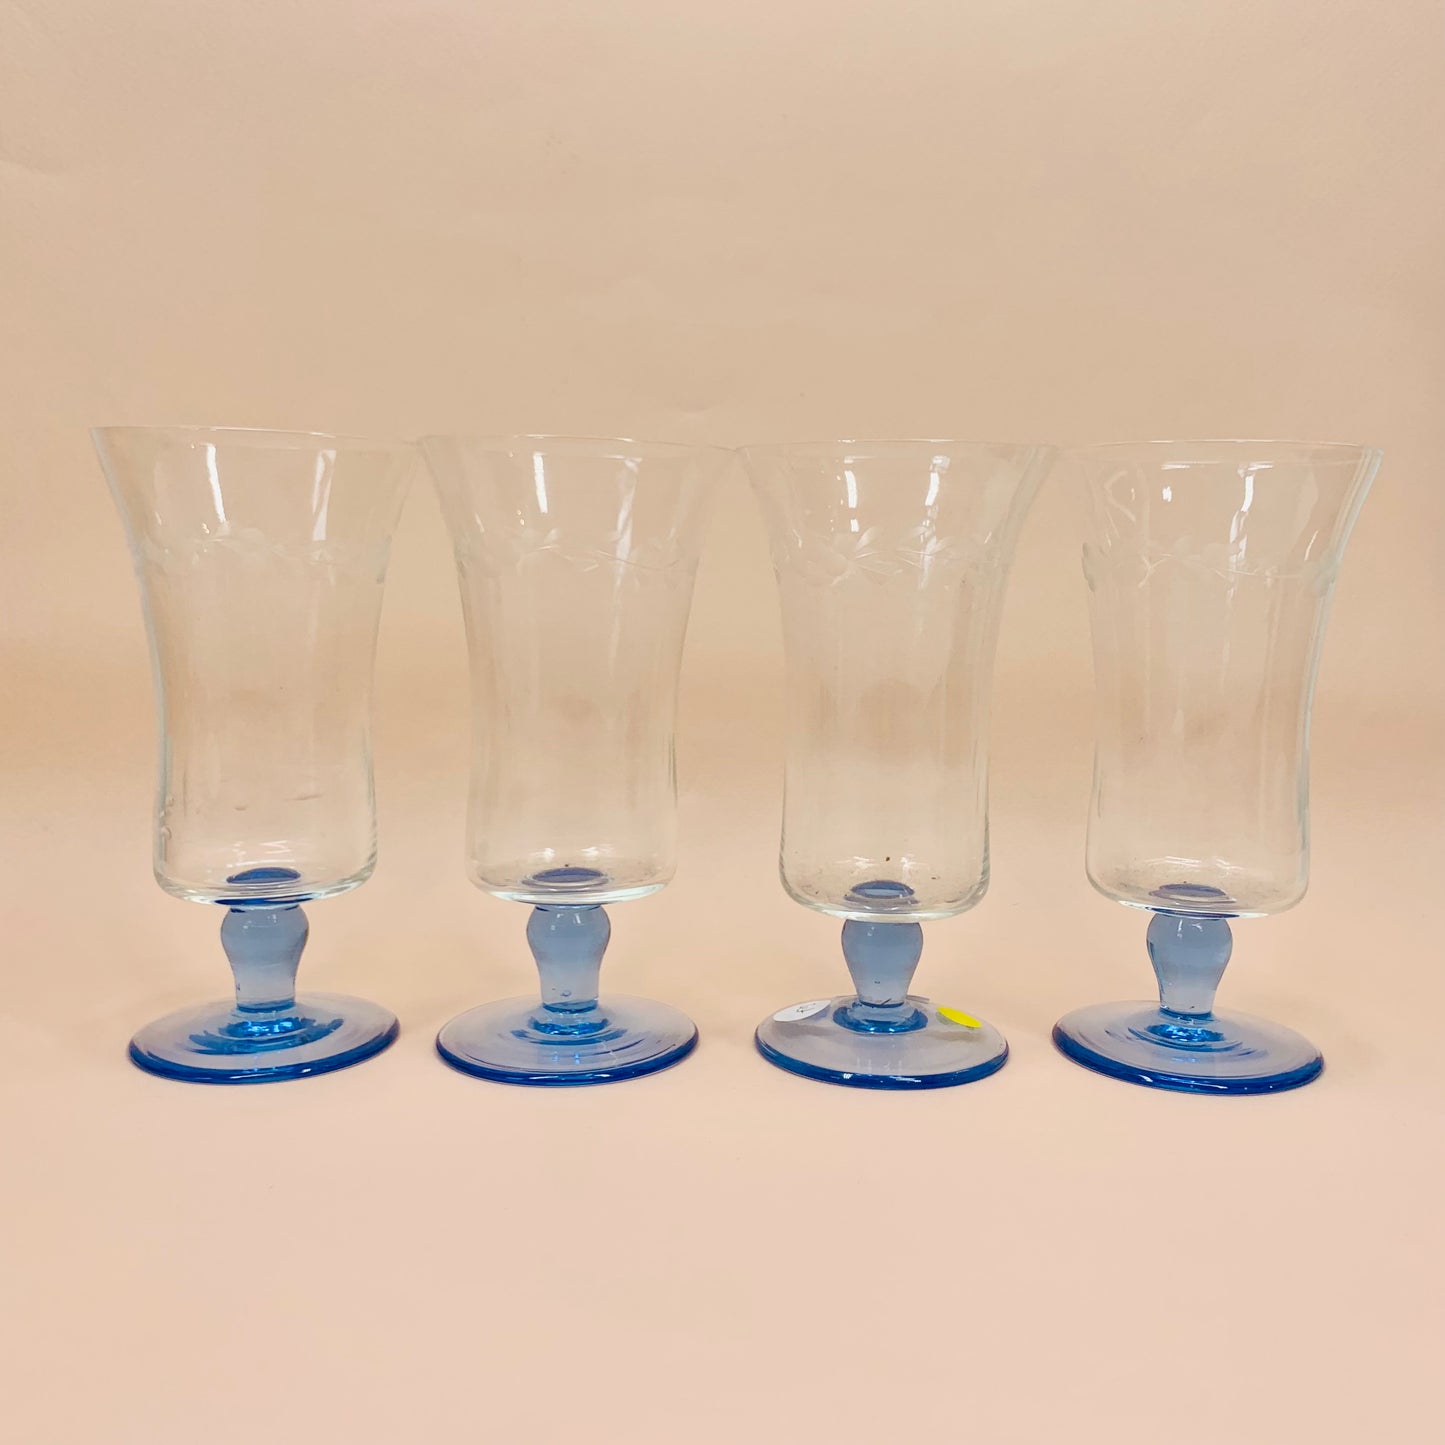 1940s hand etched wine glasses with blue short stem